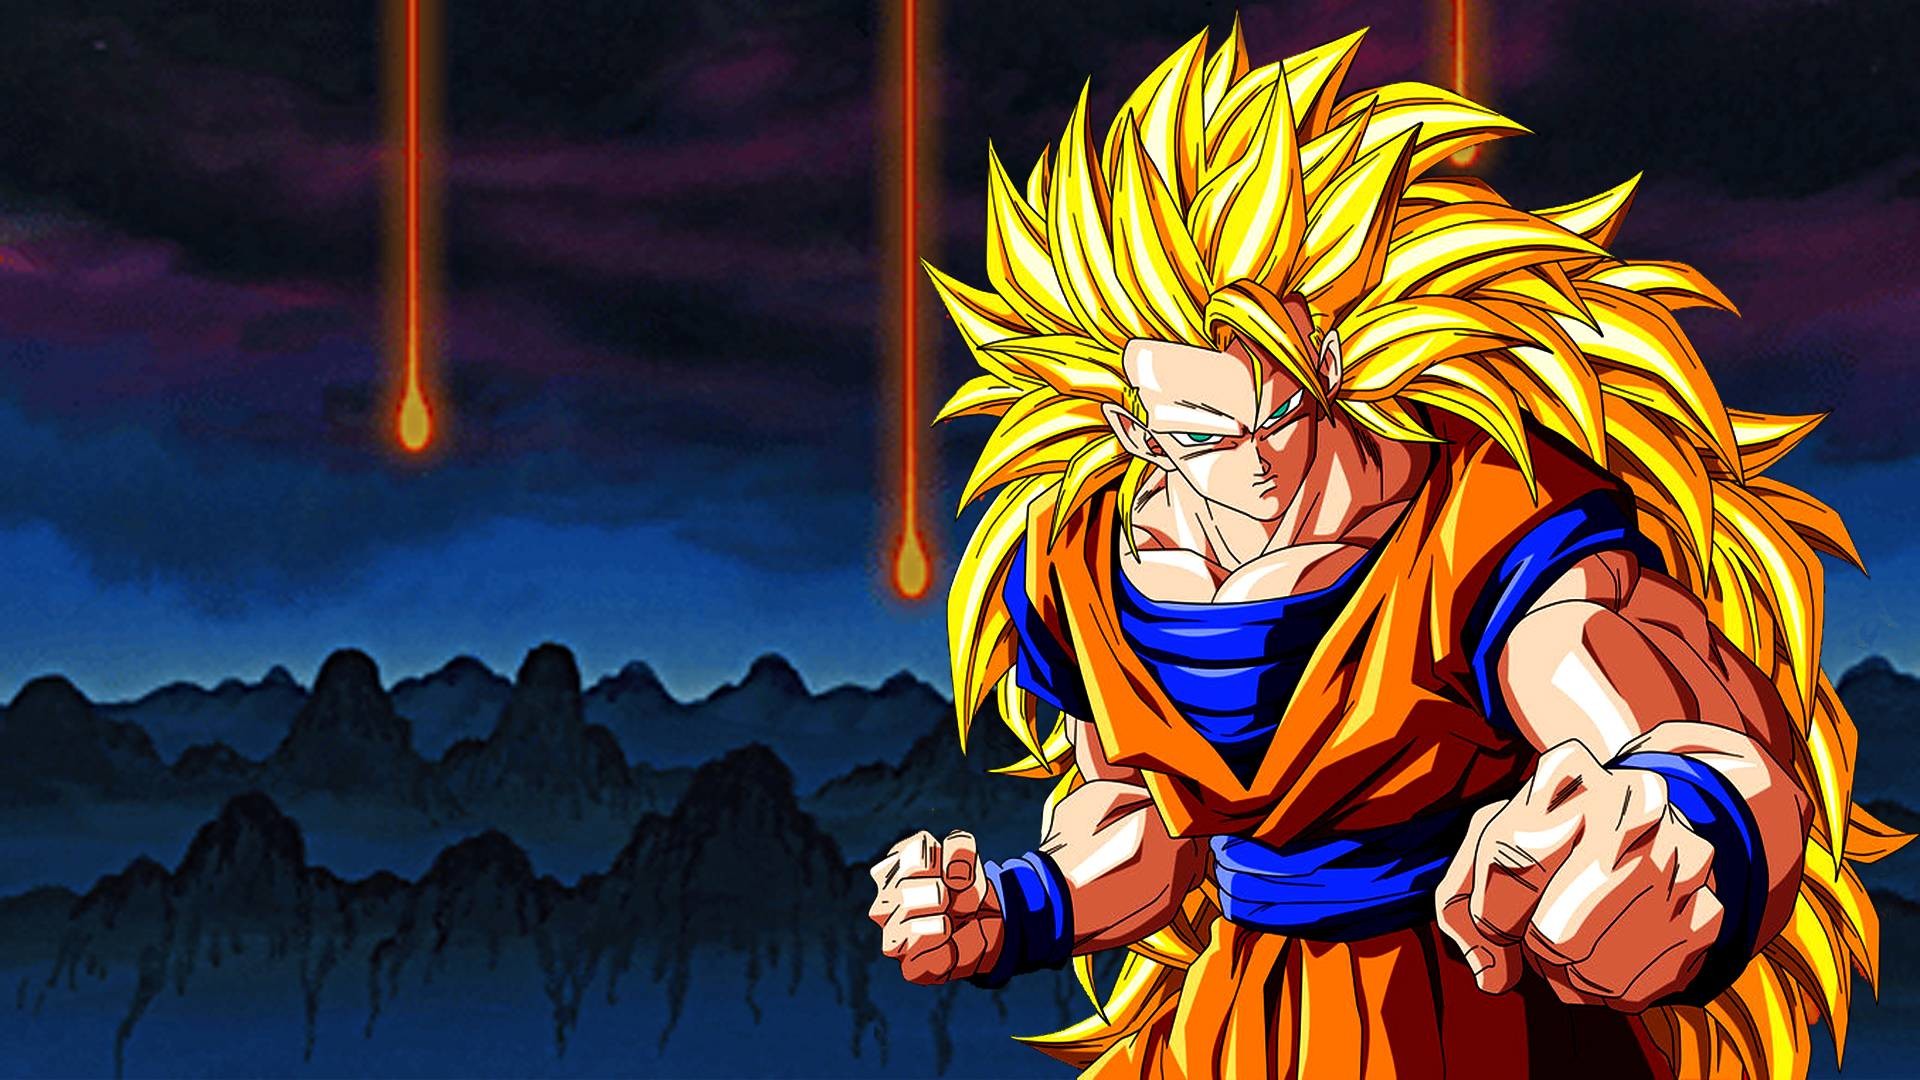 1920x1080 ... Dragon Ball Z Wallpapers Goku | HD Wallpapers, Backgrounds, Images ...